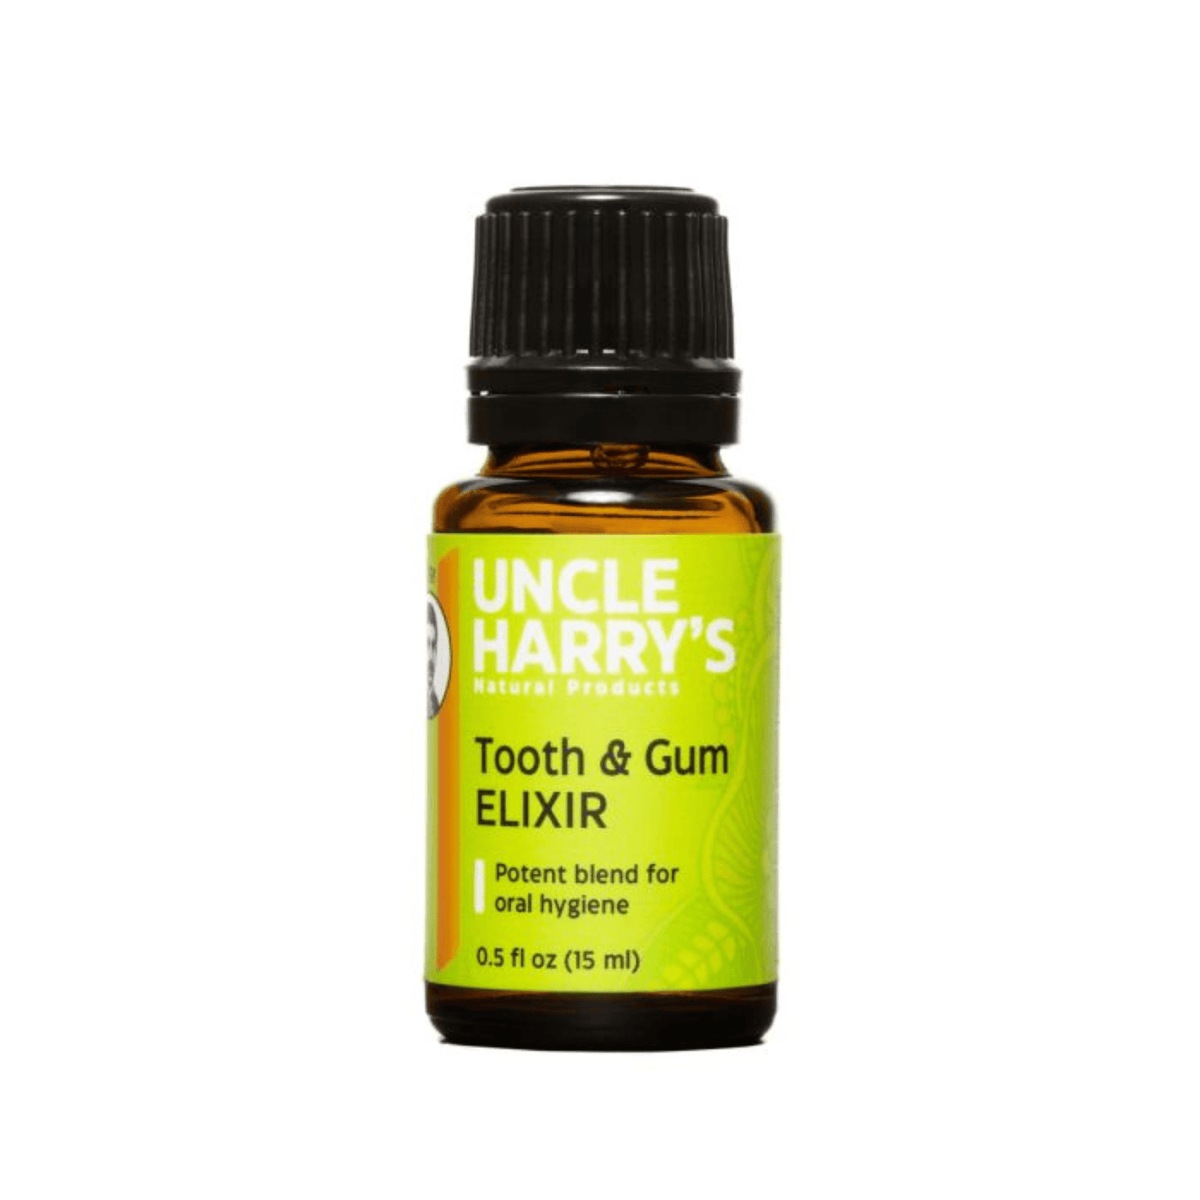 Primary Image of Tooth and Gum Elixir